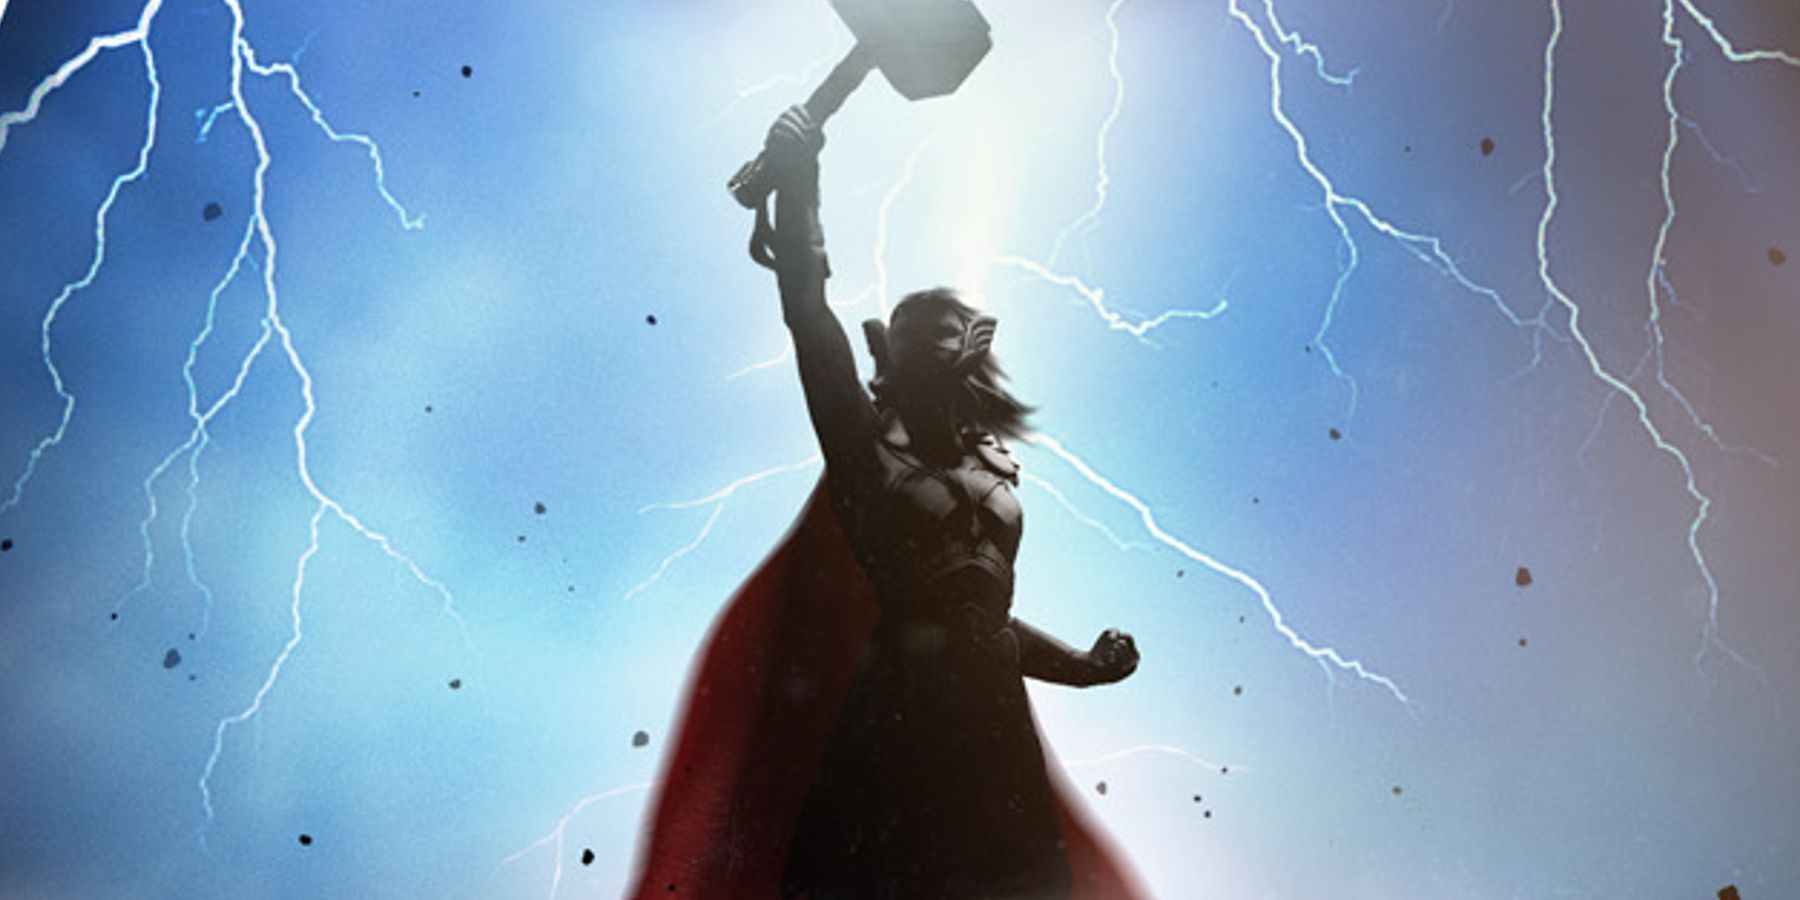 marvels avengers jane foster mighty thor announcement update 2.4 2.5 roadmap